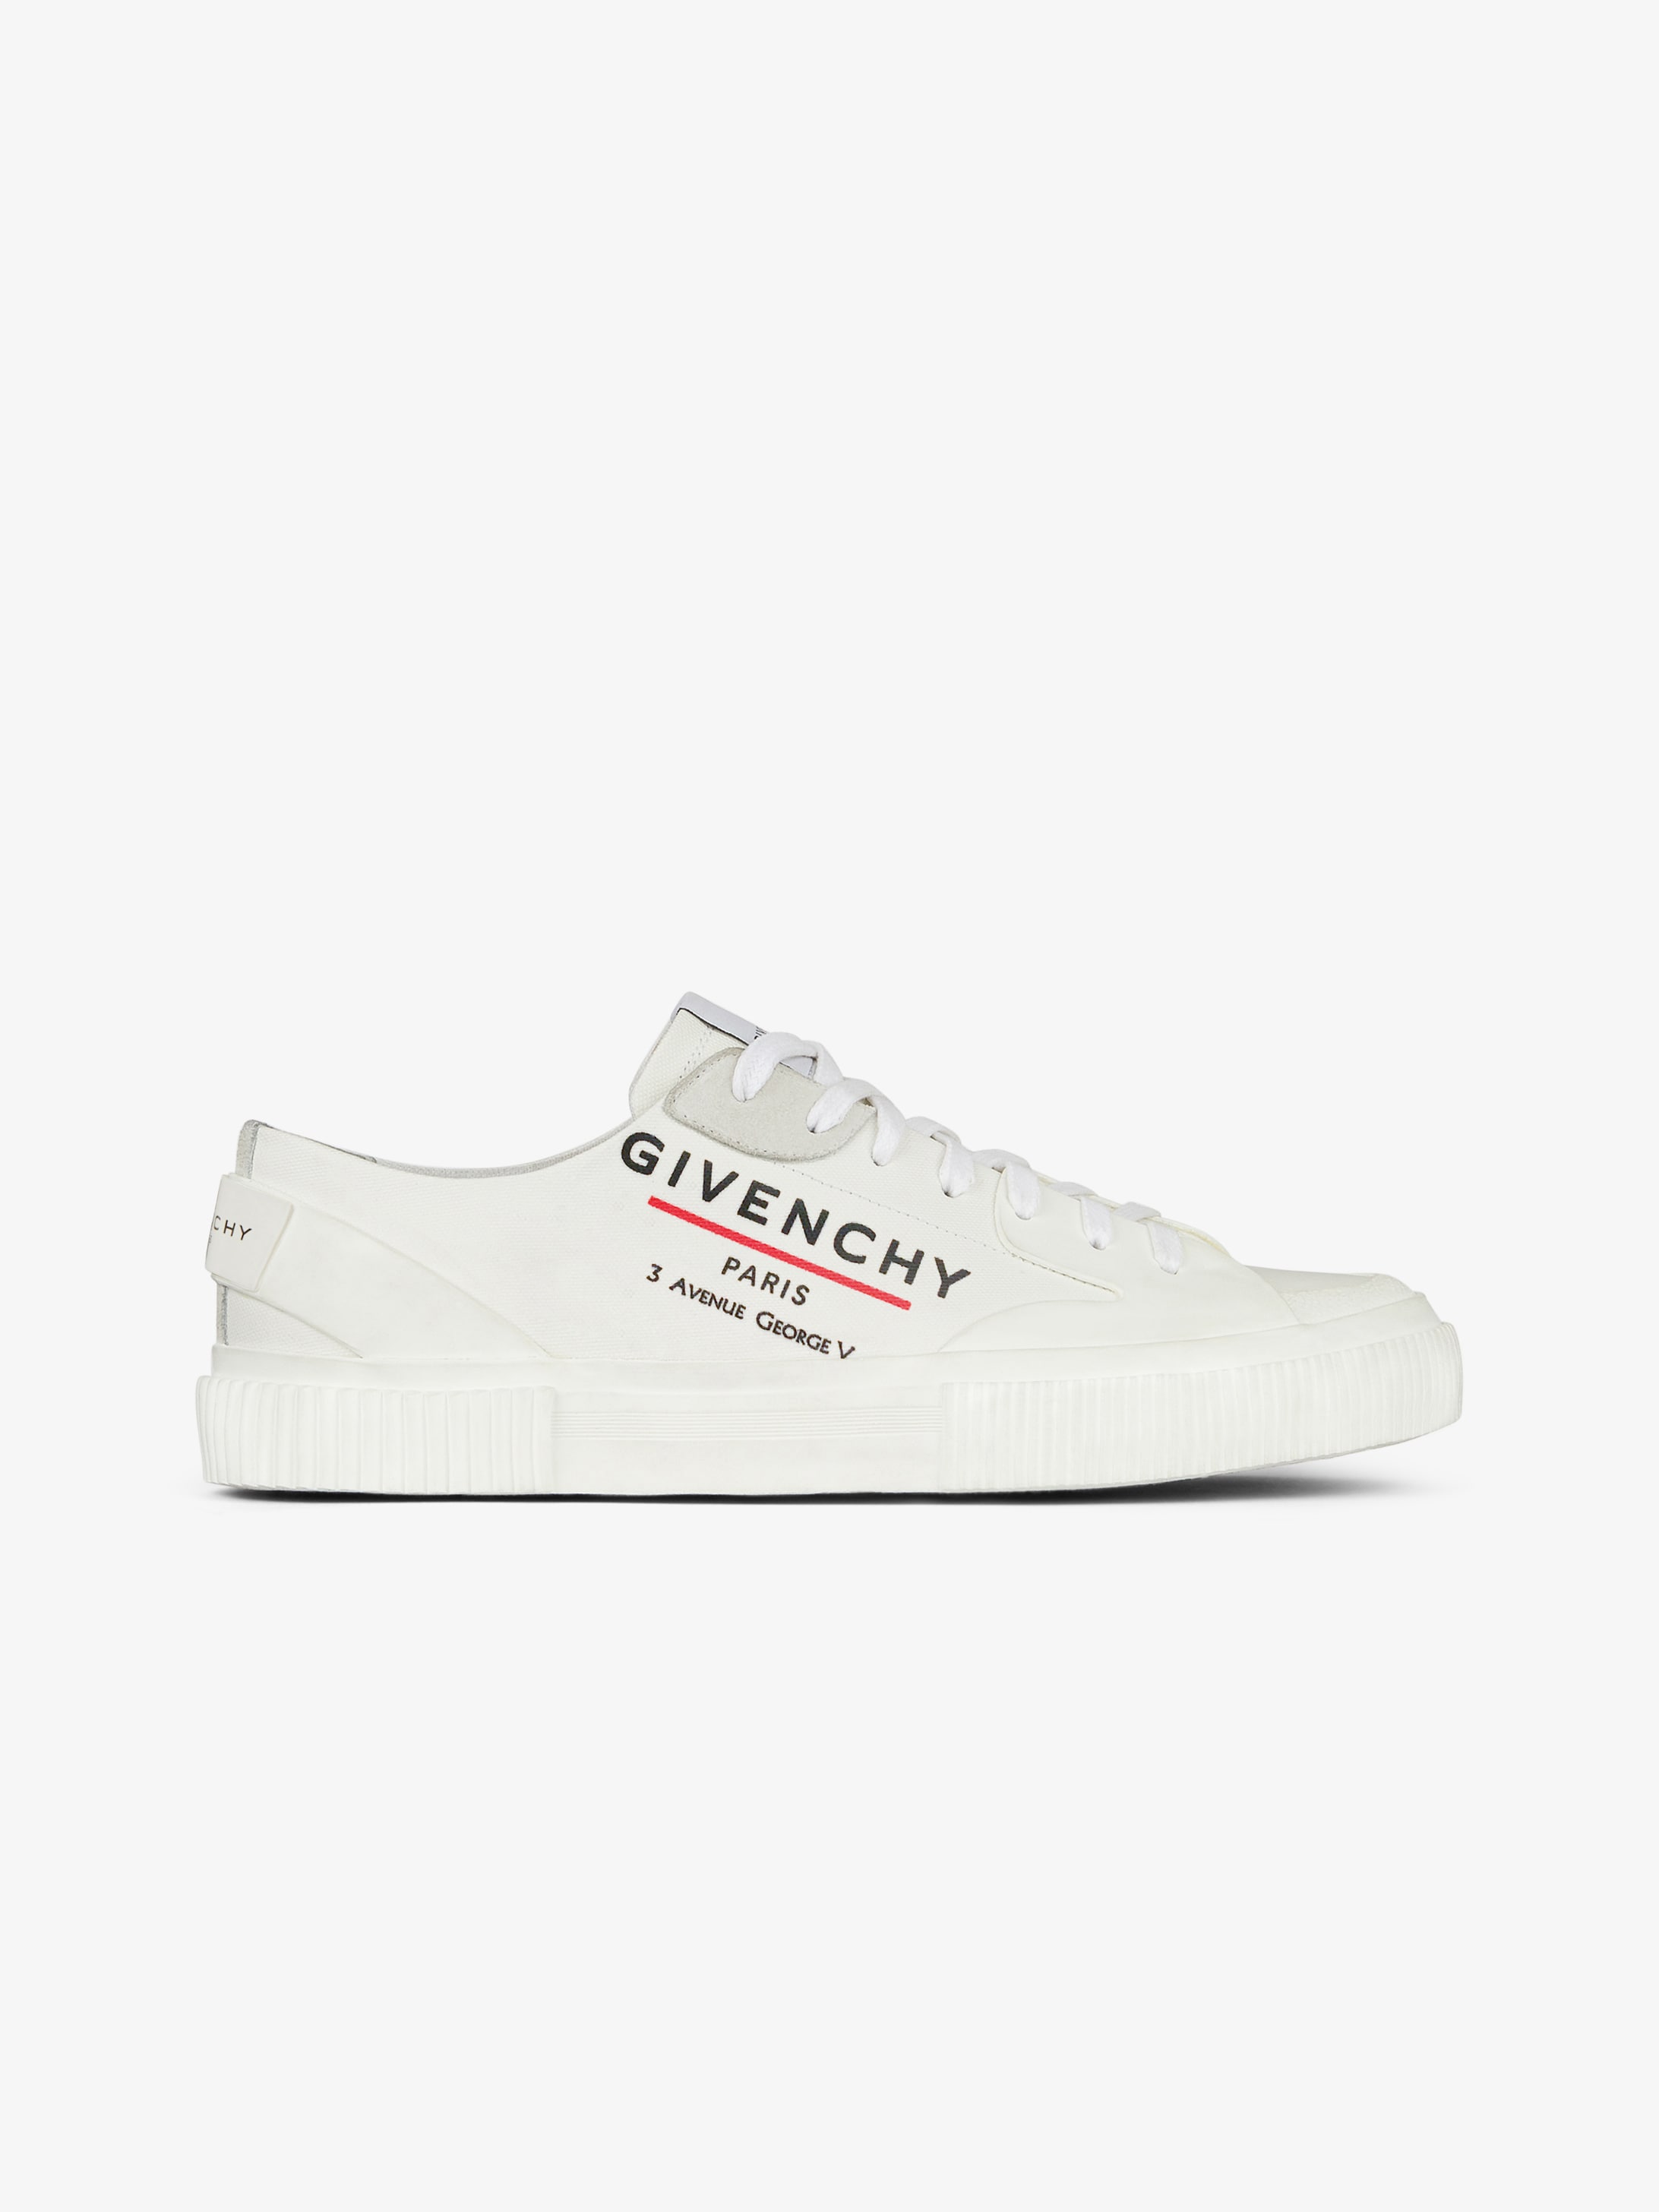 Tennis Light low sneakers in GIVENCHY 